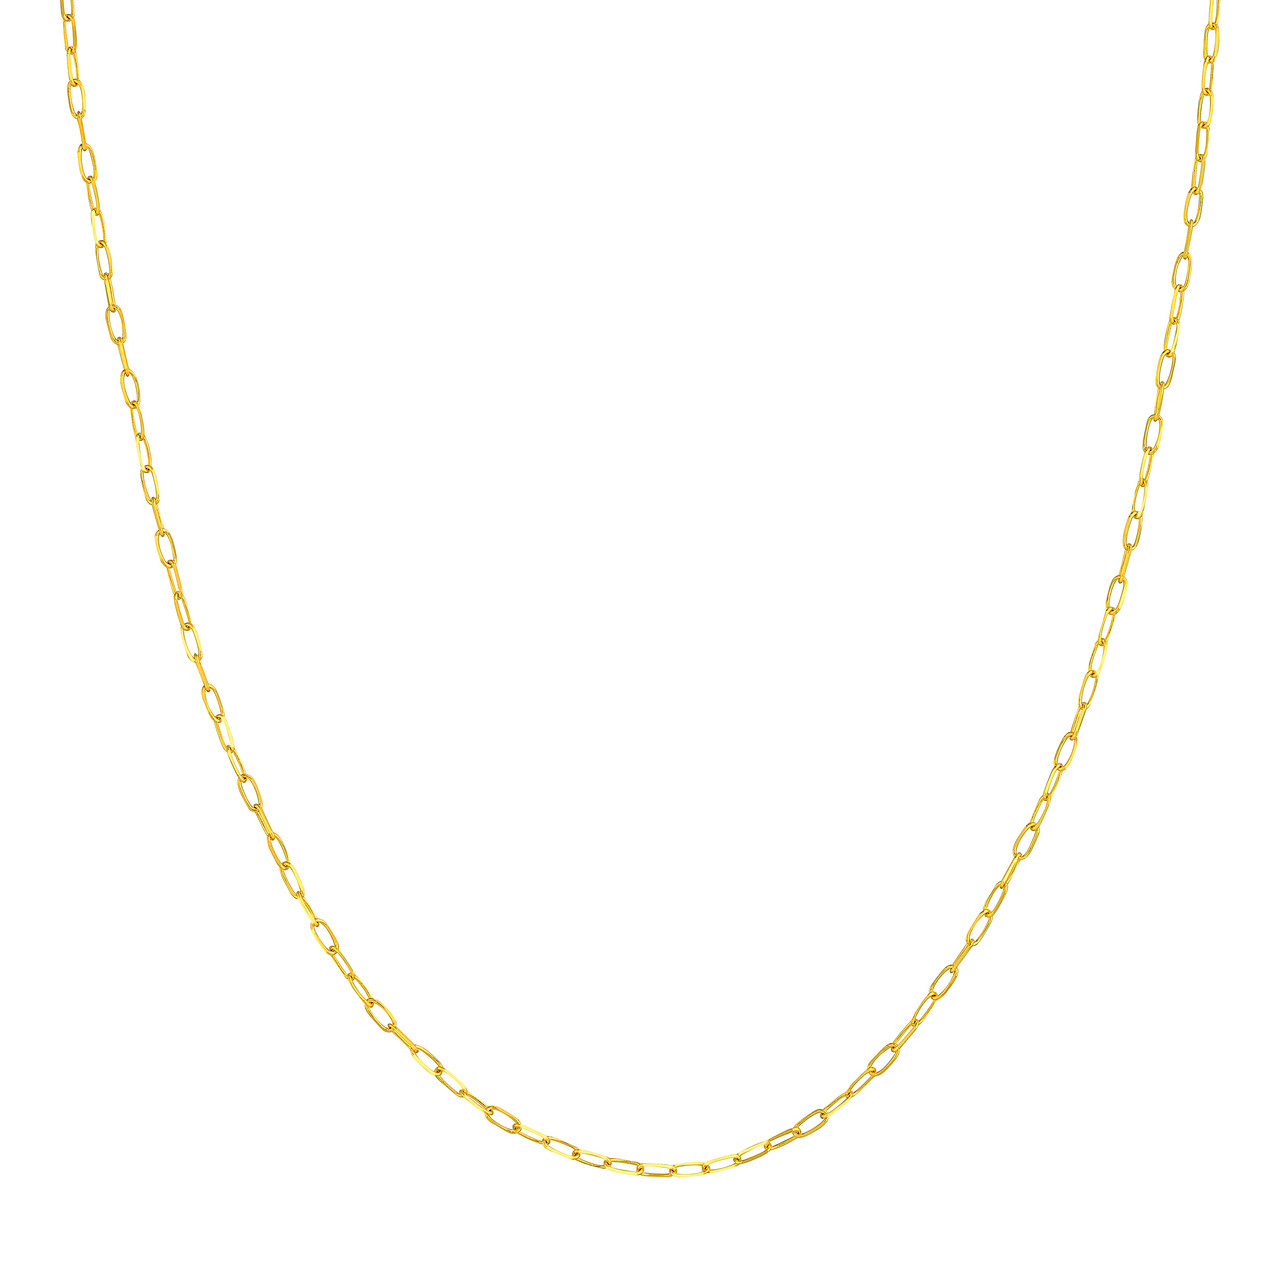 Yellow Gold Solid Petite1.7mm Paperclip Chain l 18 inches